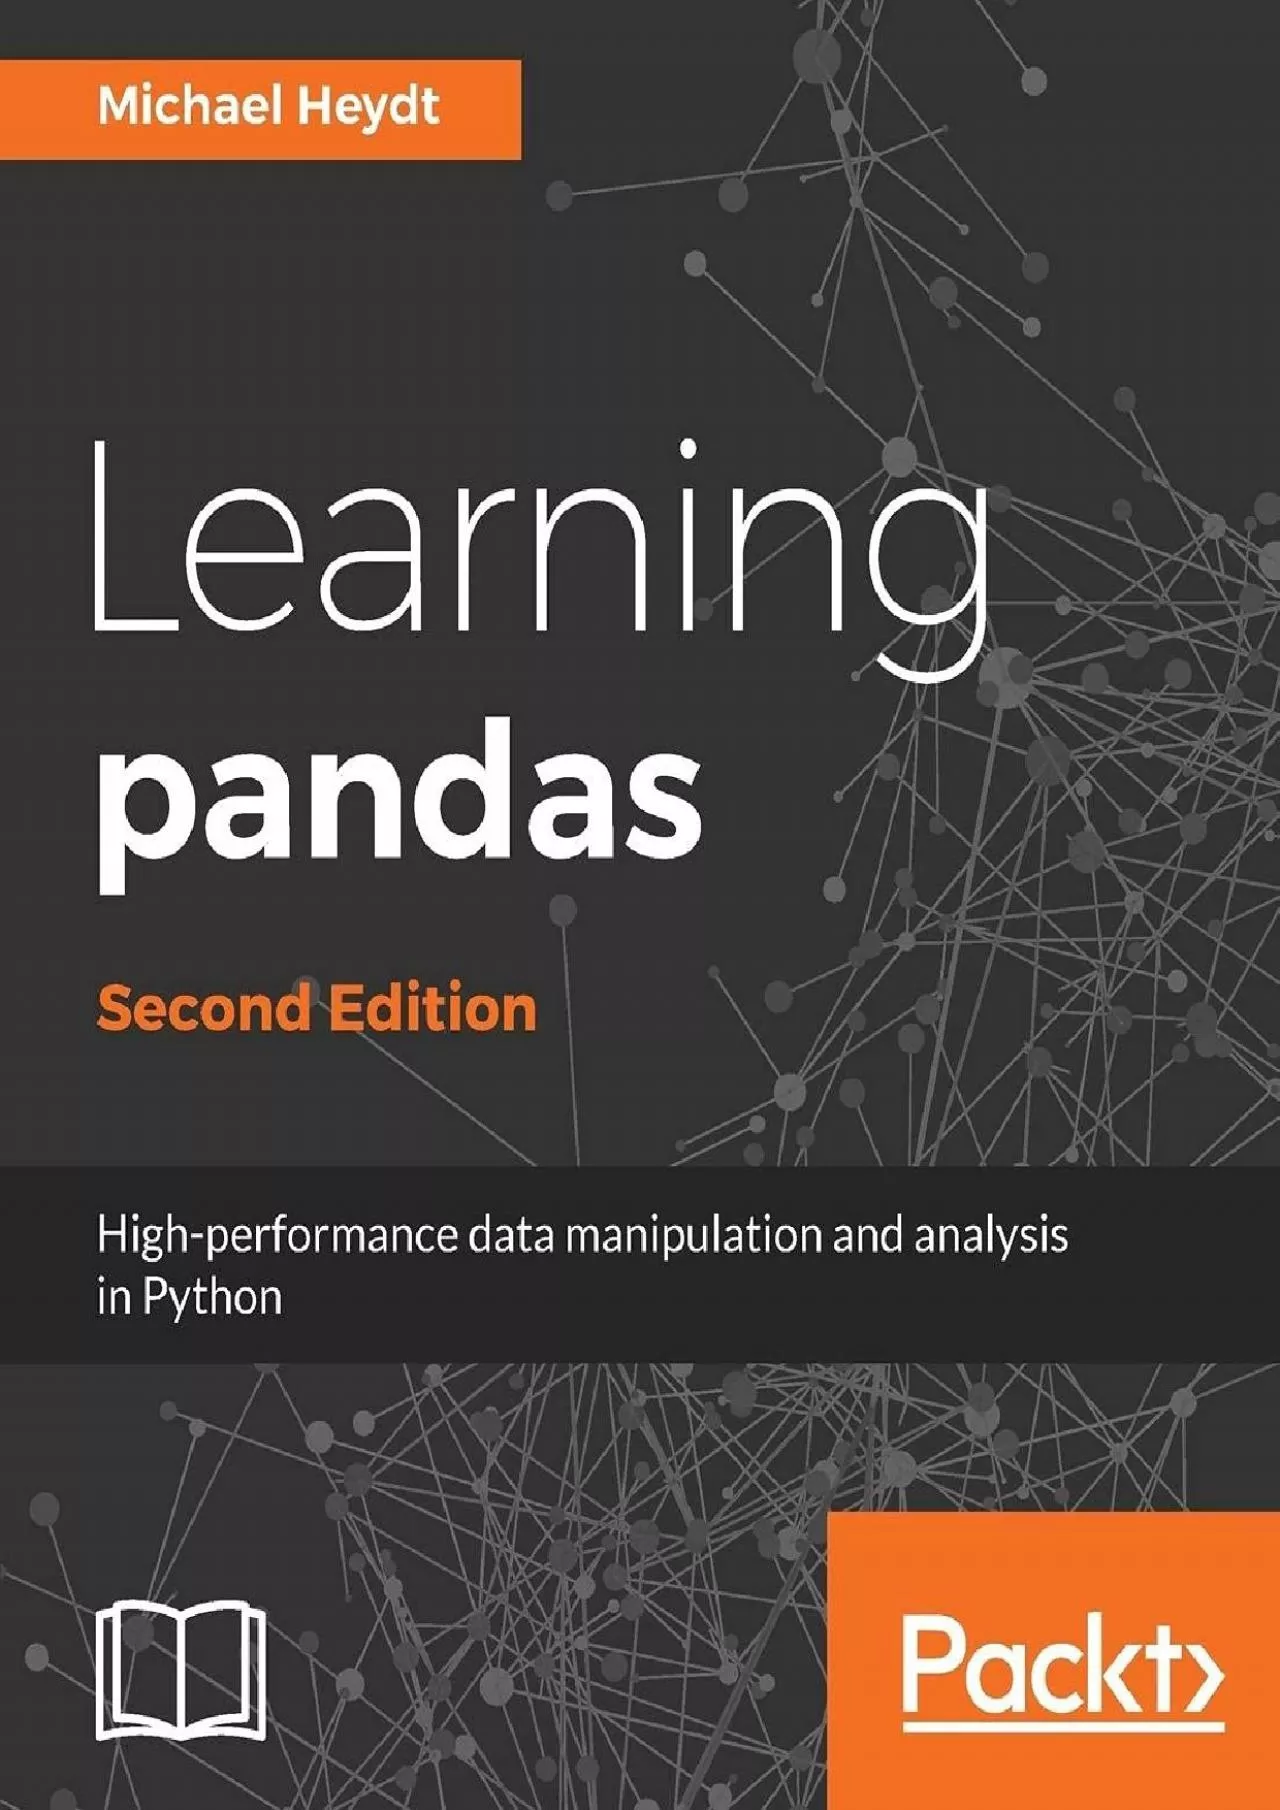 [BEST]-Learning pandas - Second Edition High performance data manipulation and analysis